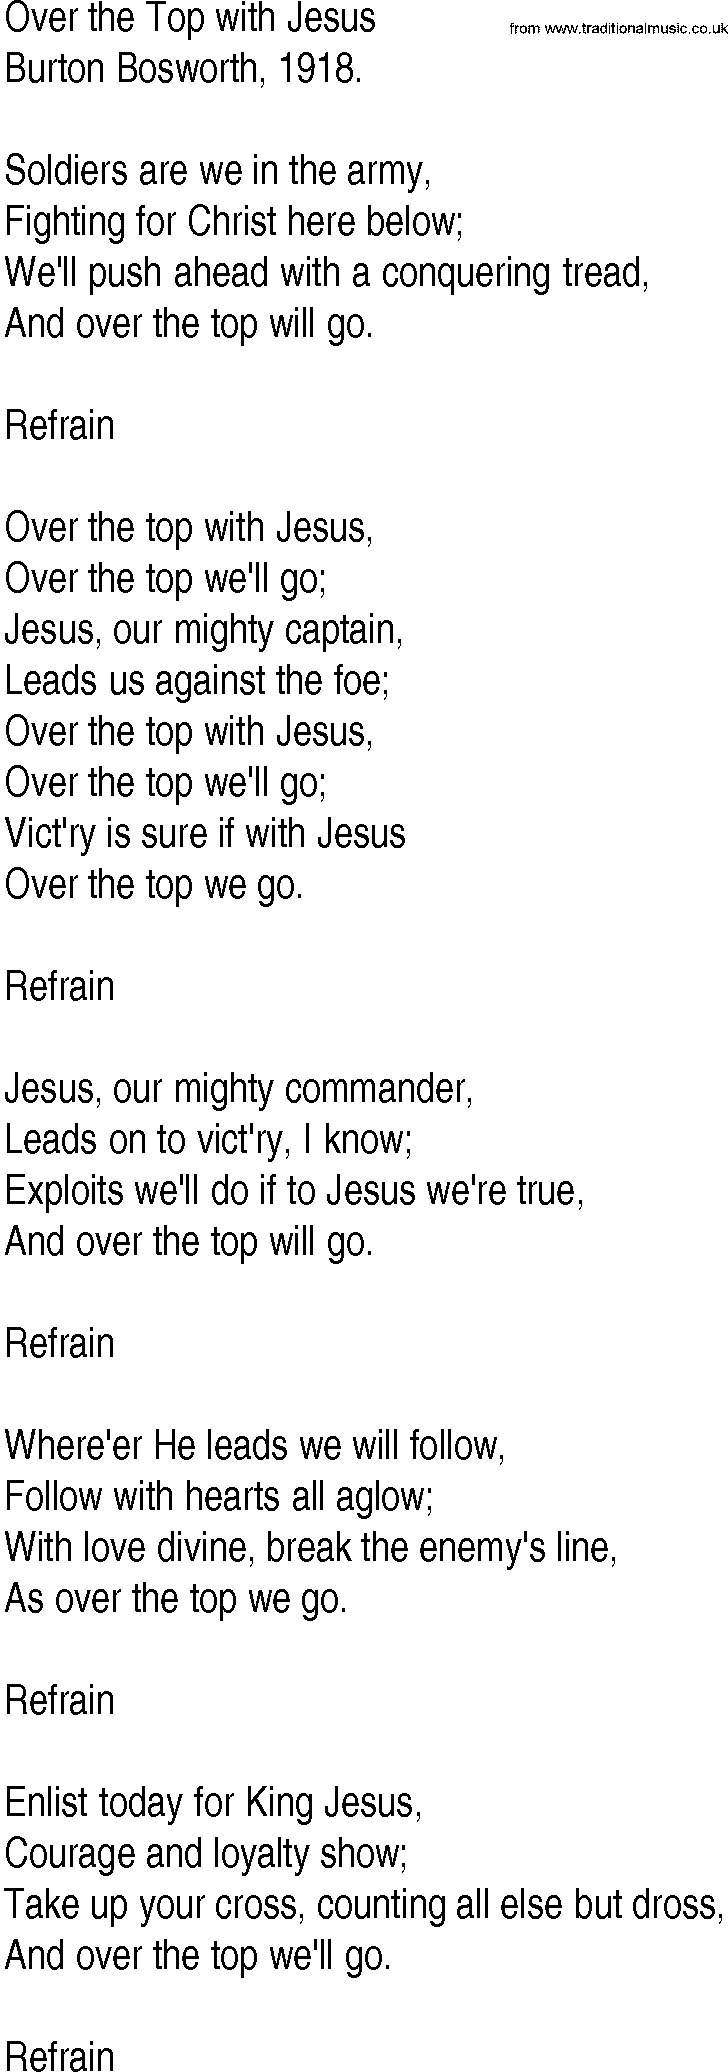 Hymn and Gospel Song: Over the Top with Jesus by Burton Bosworth lyrics